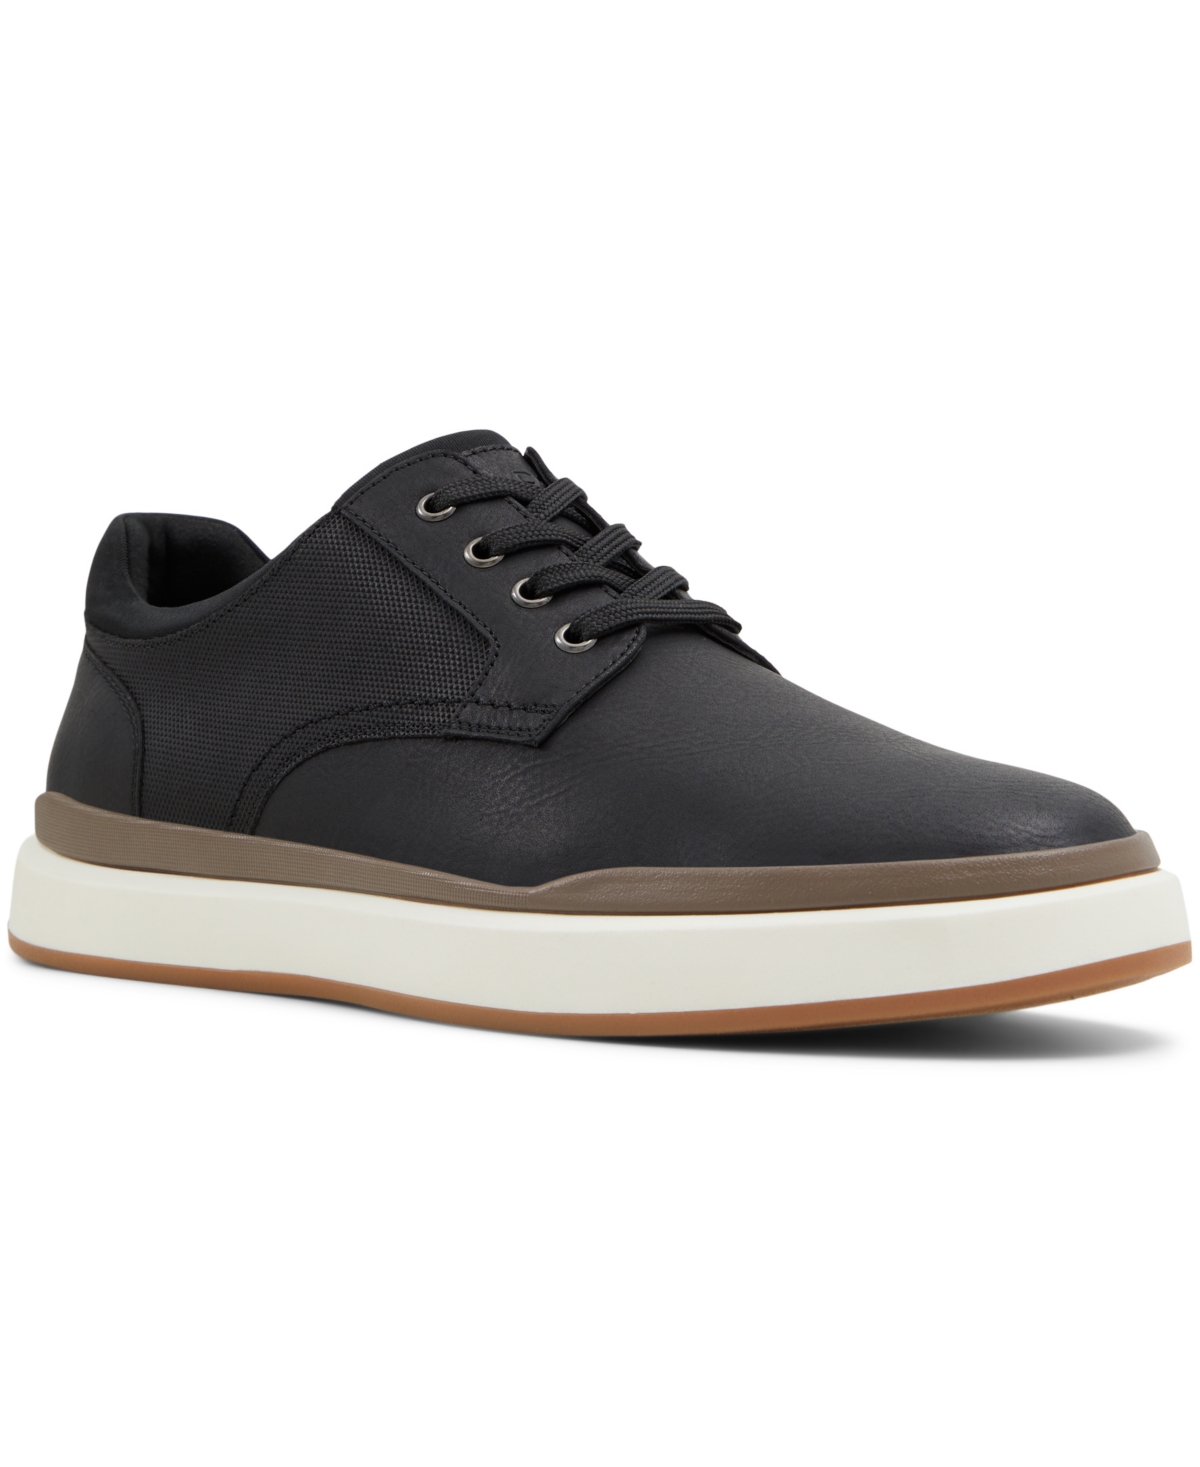 Men's Upton Casual Lace Up Sneaker - Black